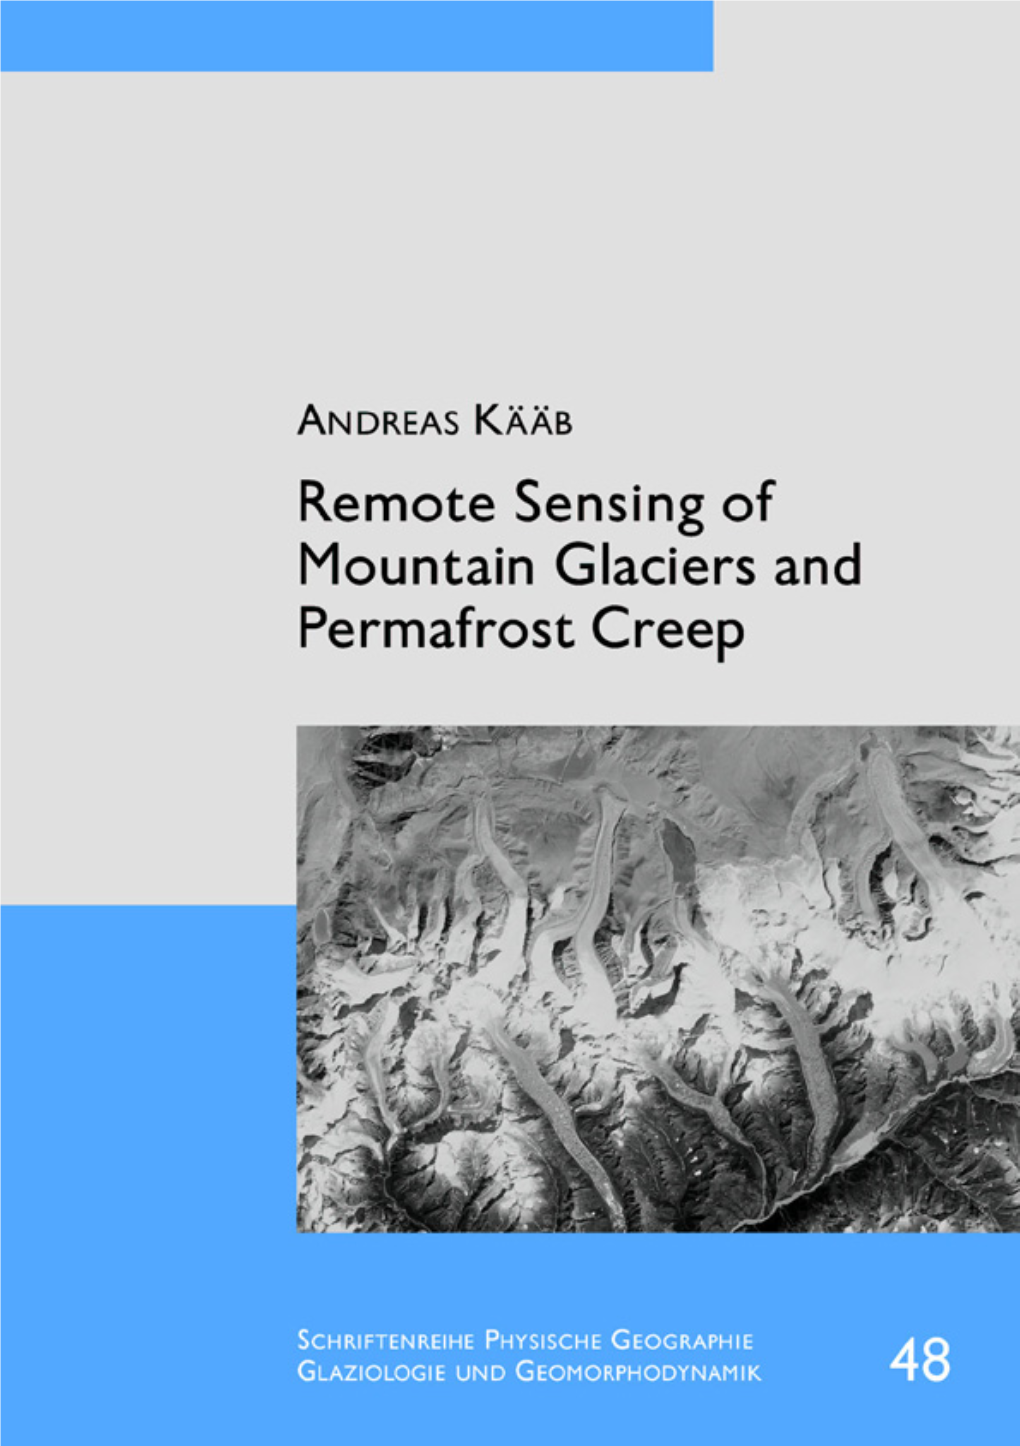 Remote Sensing of Mountain Glaciers and Permafrost Creep